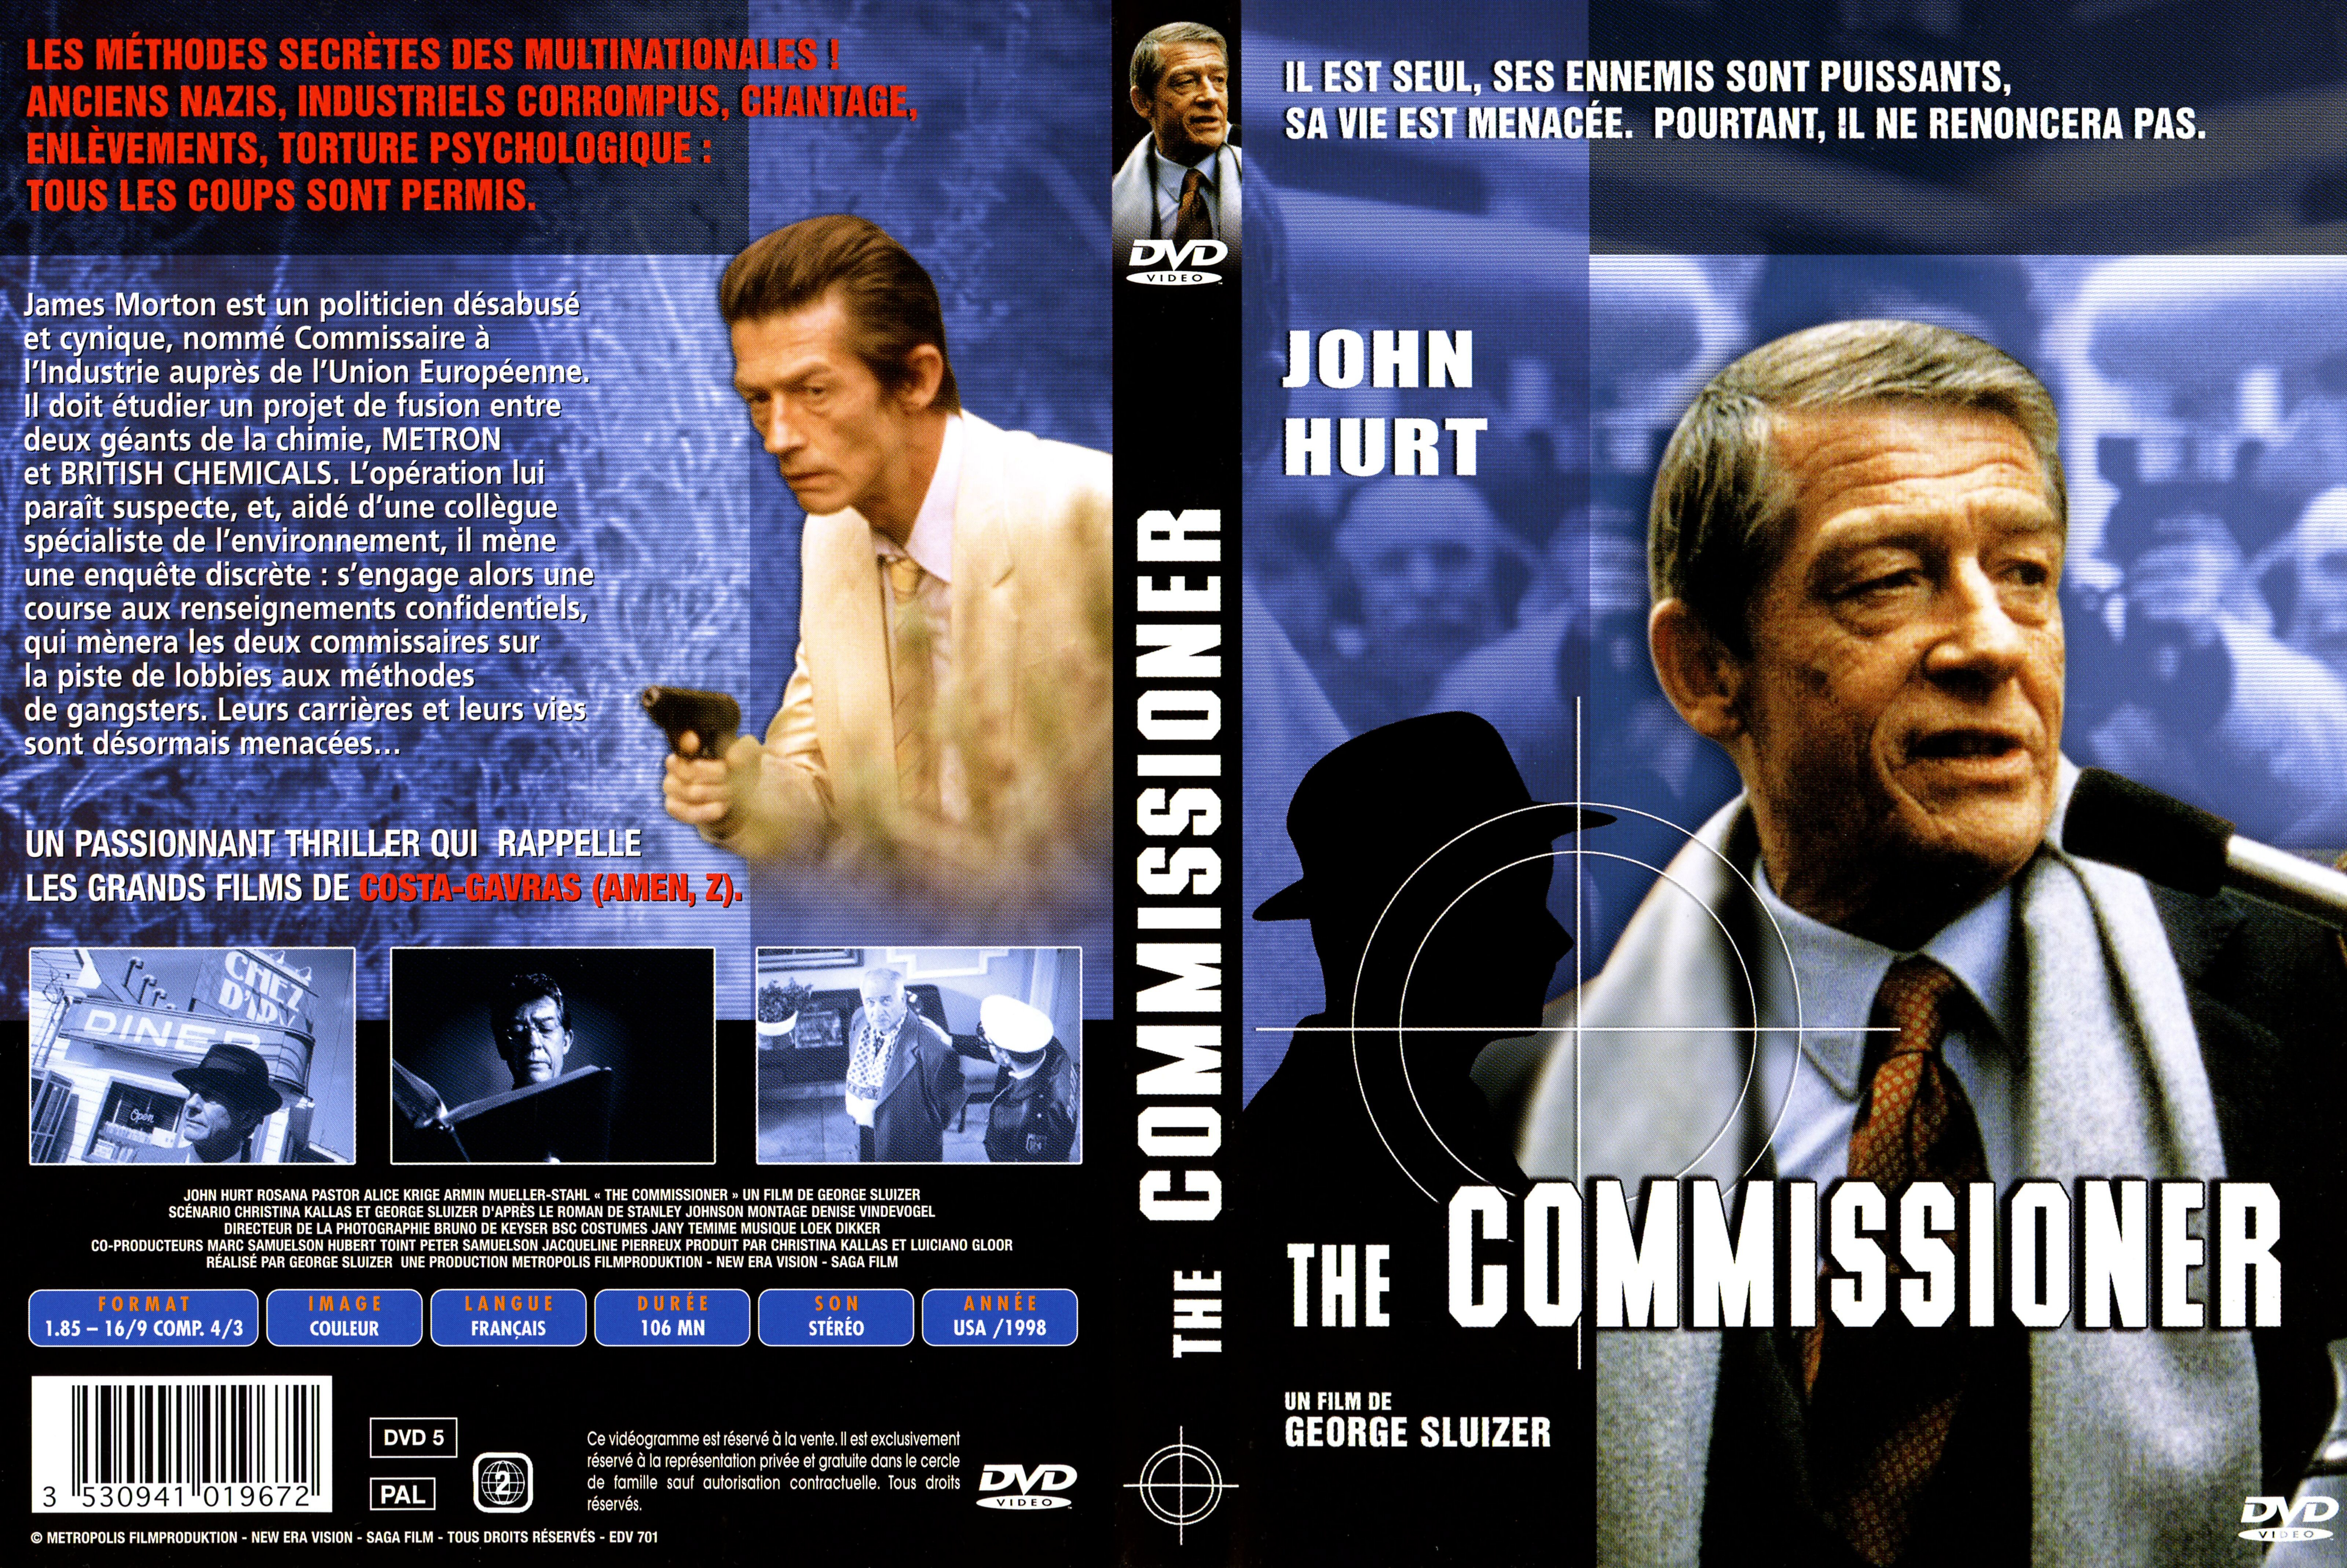 Jaquette DVD The commissioner